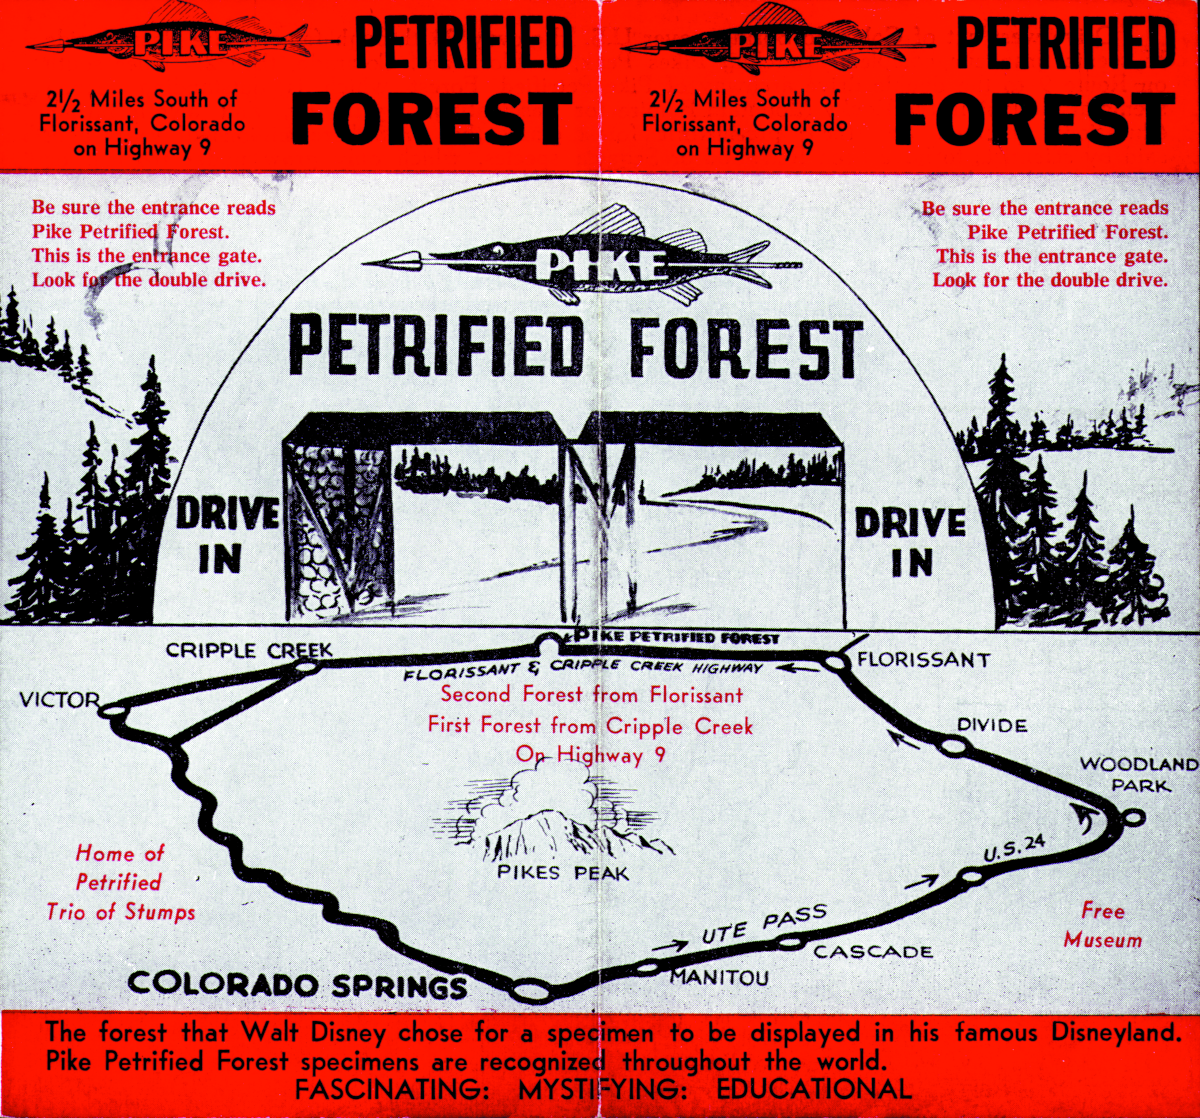 A red, black, and white brochure folded out to display an ink drawing of a map and sign that says Pike Petrified Forest.